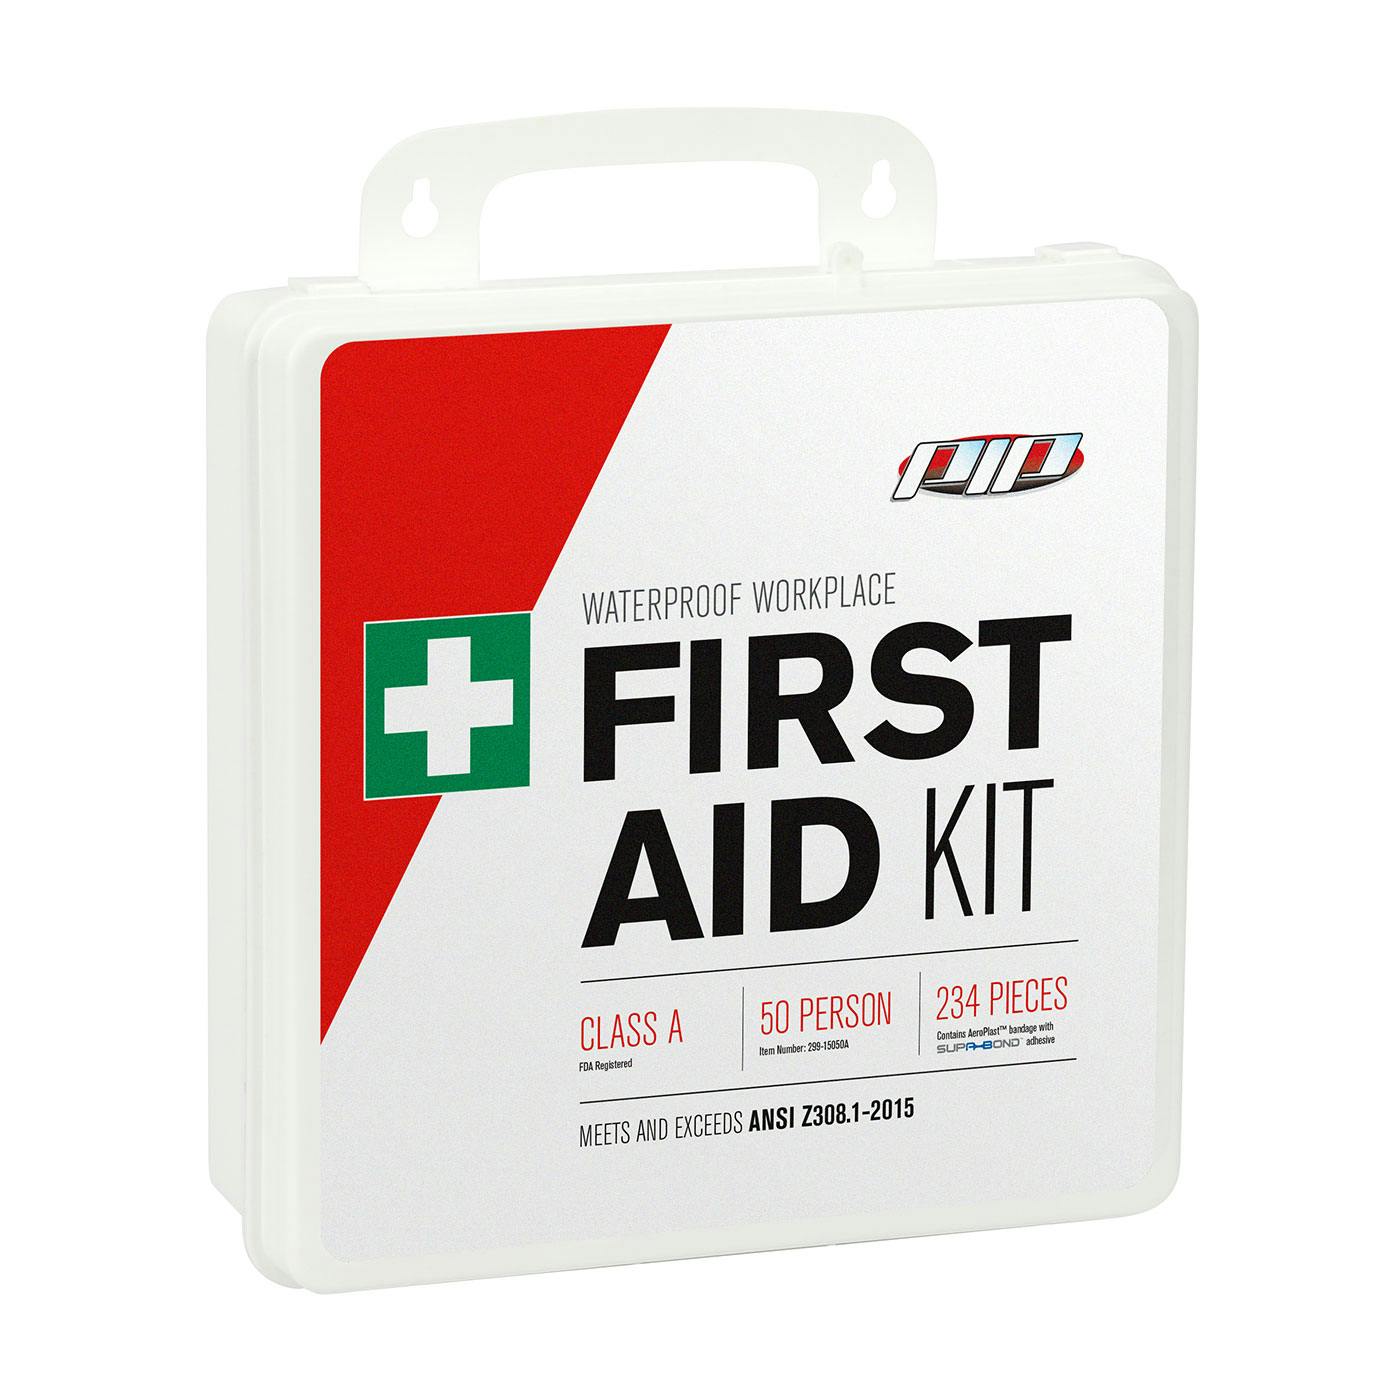 ANSI Class A Waterproof First Aid Kit - 50 Person, White (299-15050A) - KIT_0